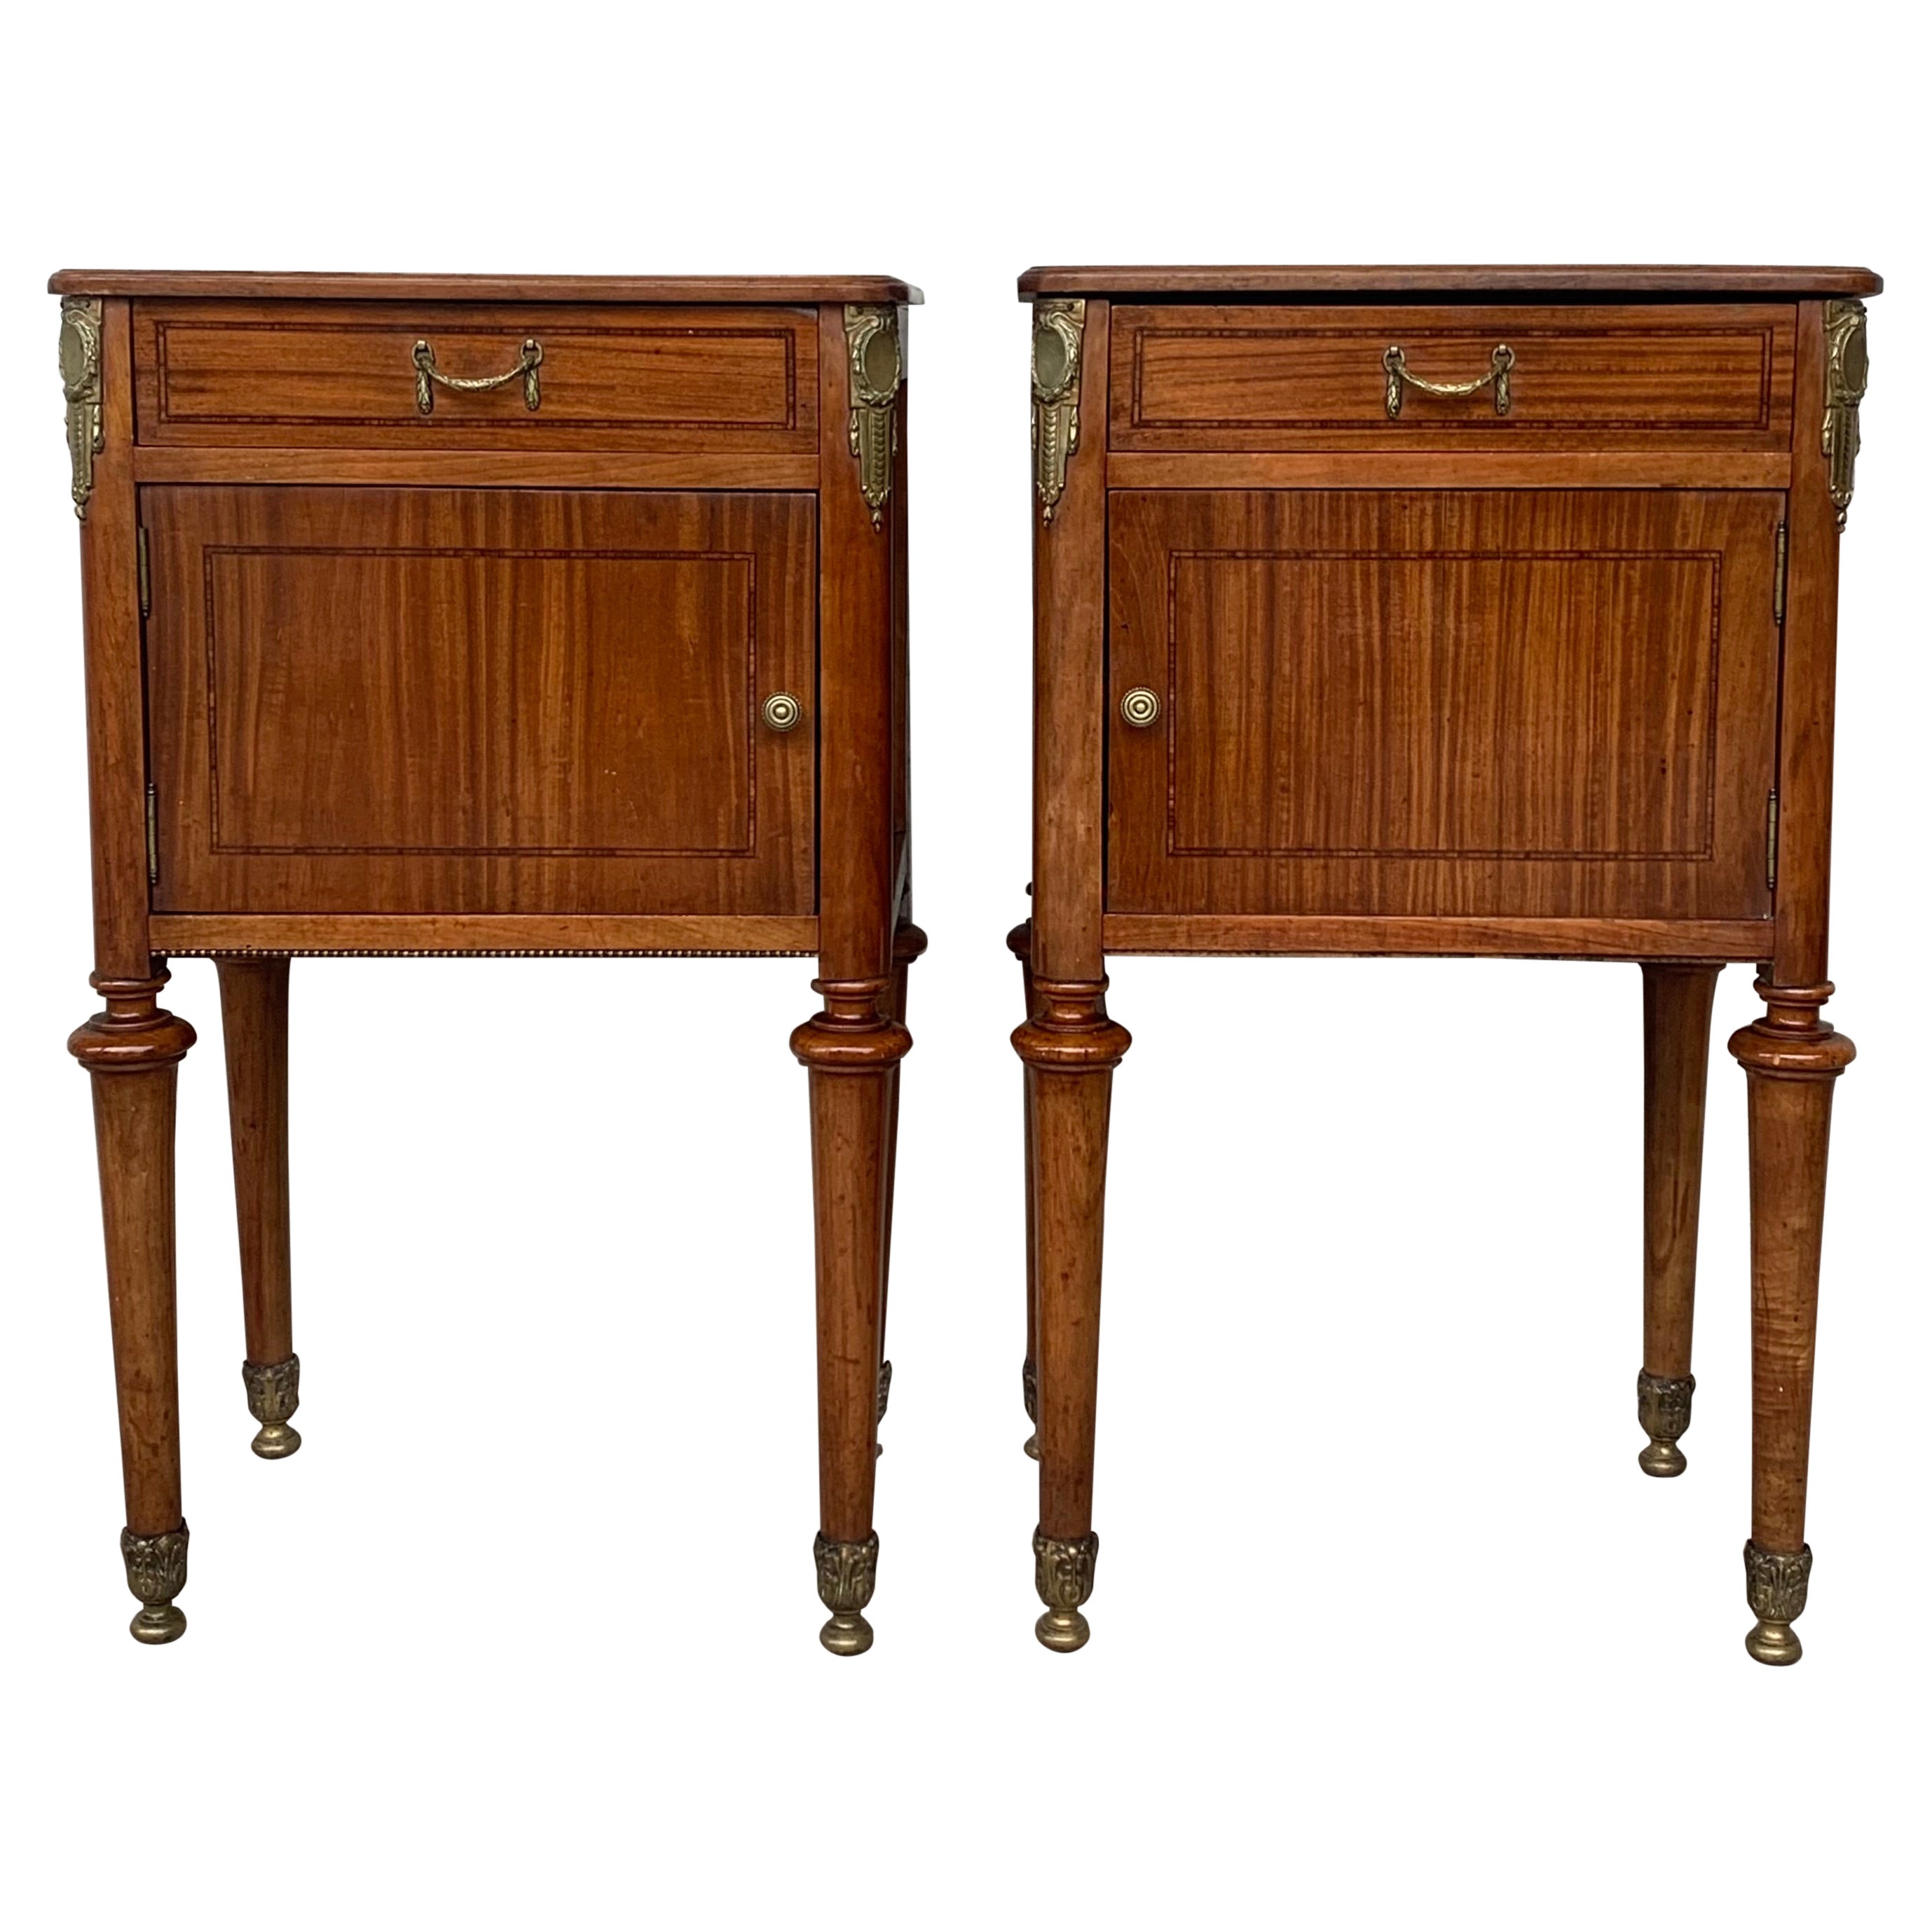 French Antique Pair of Bedside Tables or Cabinet, Nightstands, circa 1890